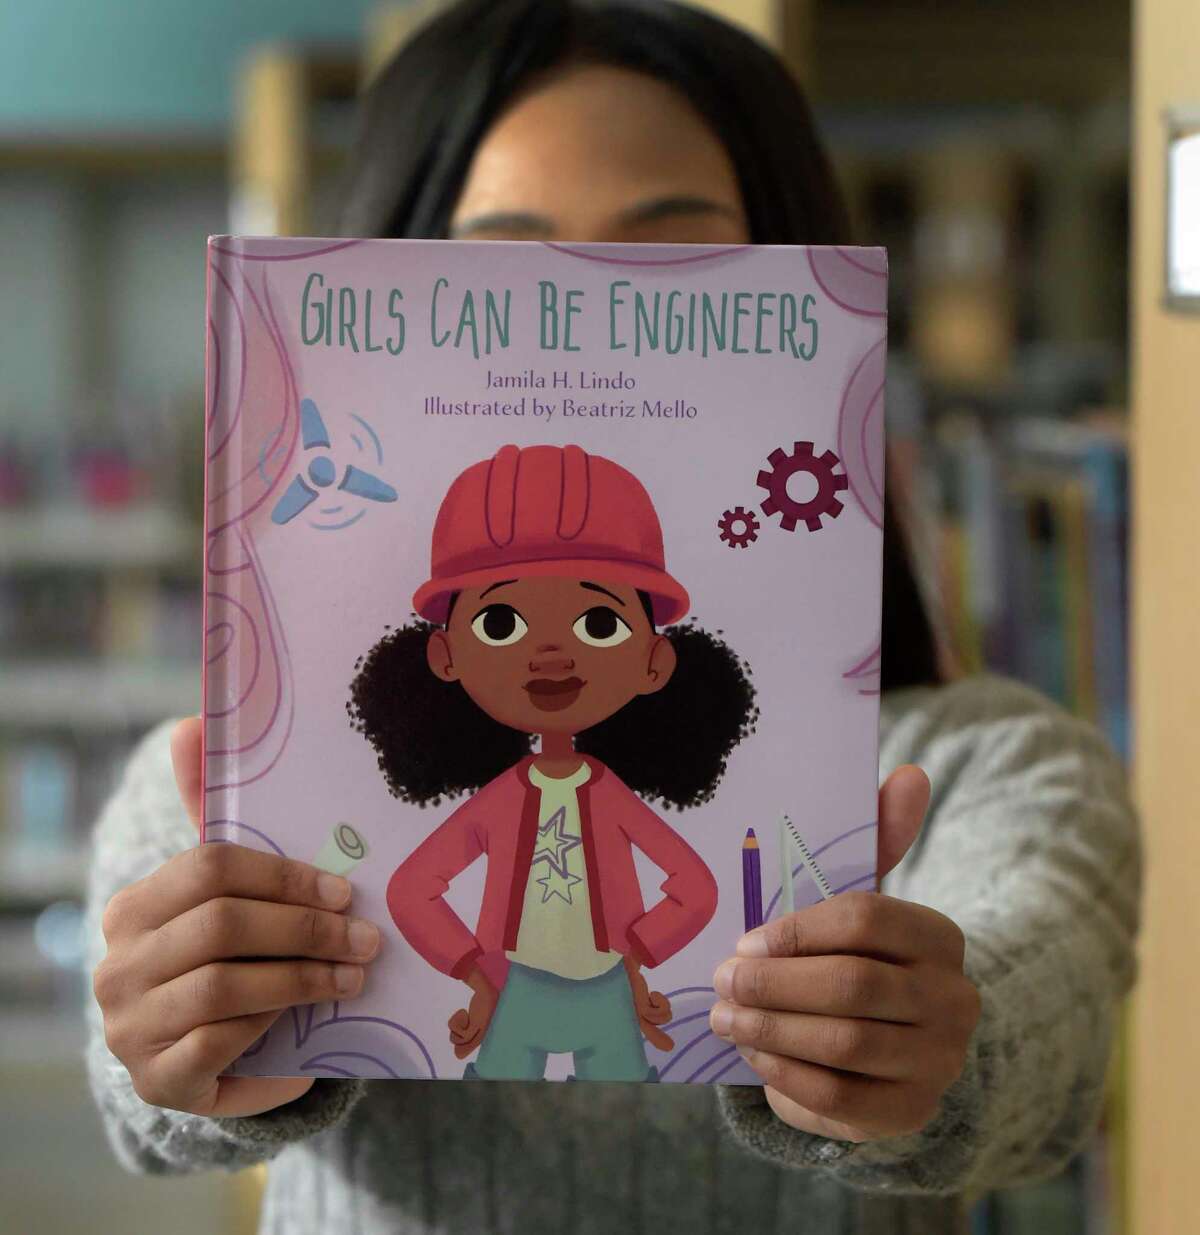 “Girls Can Be Engineers”, written by Jamila Lindo, of Norwalk, is available in the South Norwalk branch of the Norwalk Public Library. The book promotes STEM exploration among girls and encourages them to pursue careers in science, technology, engineering and math. Tuesday, January 10, 2023, Norwalk, Conn.